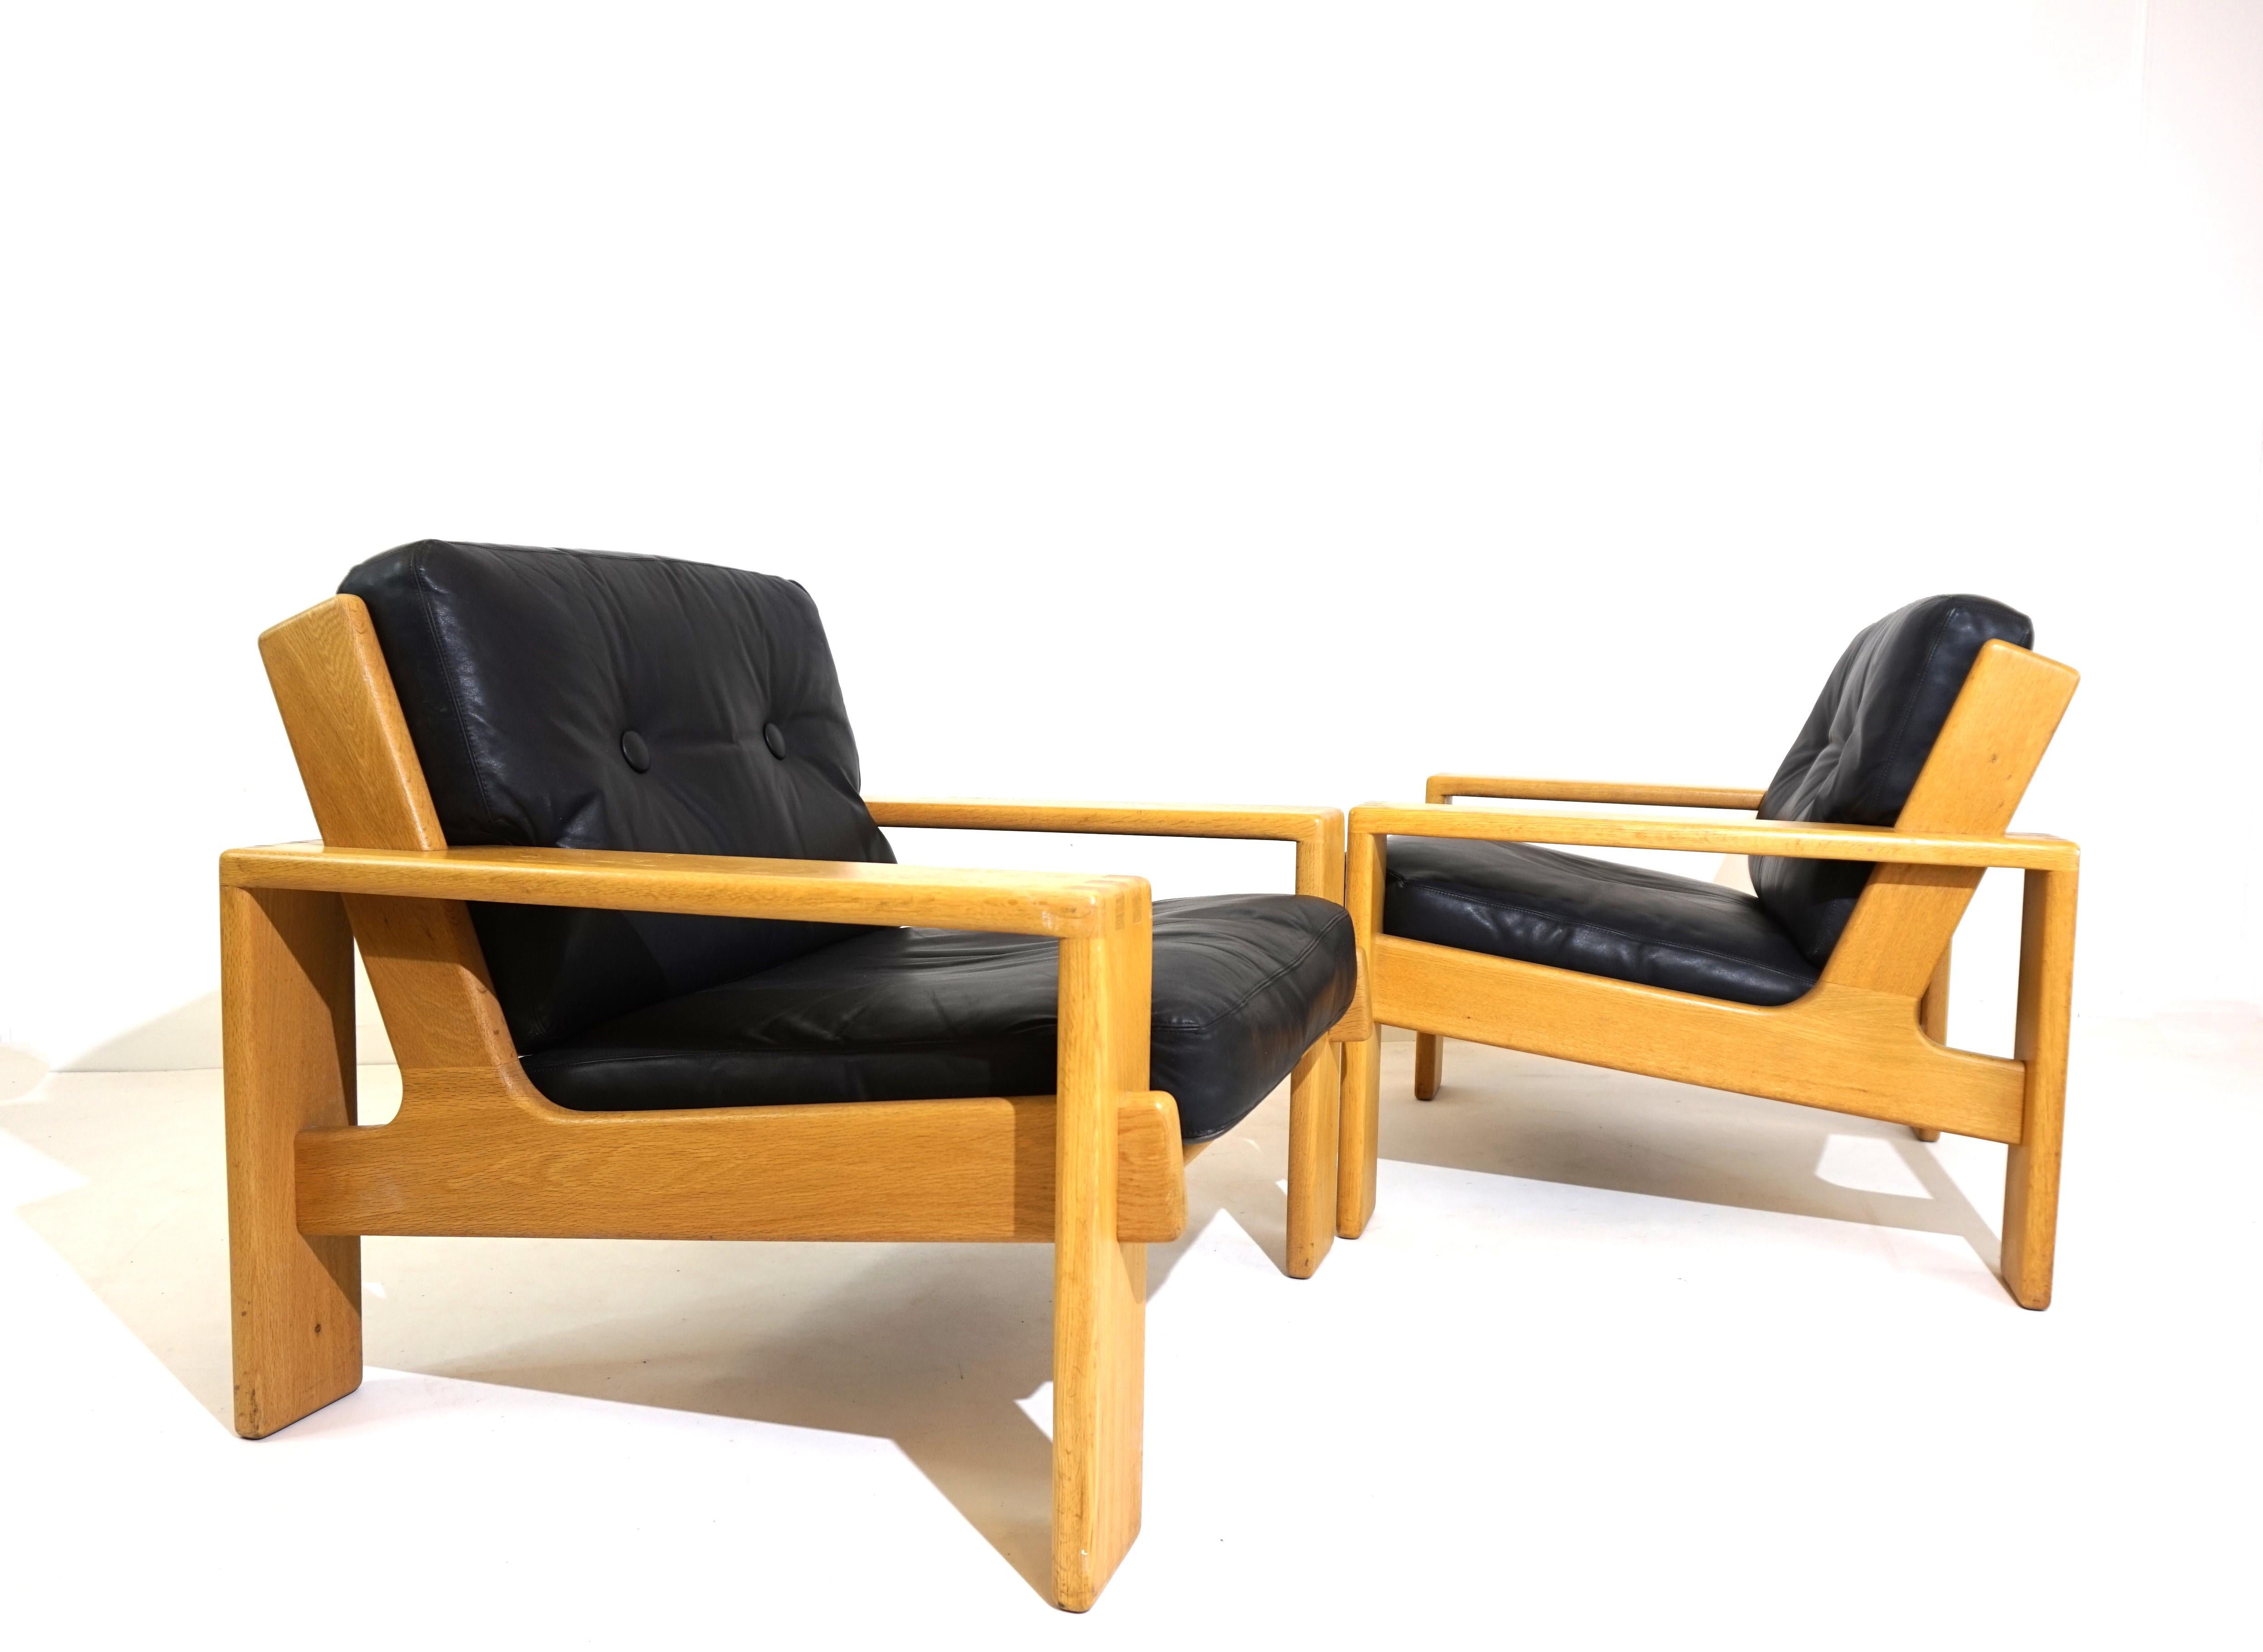 Two Bonanza armchairs from the 60s in the beautiful combination of black leather and light wooden frame. The armchairs show minimal signs of wear on the leather, the thick leather is soft and supple. The wooden frames are in perfect condition. The